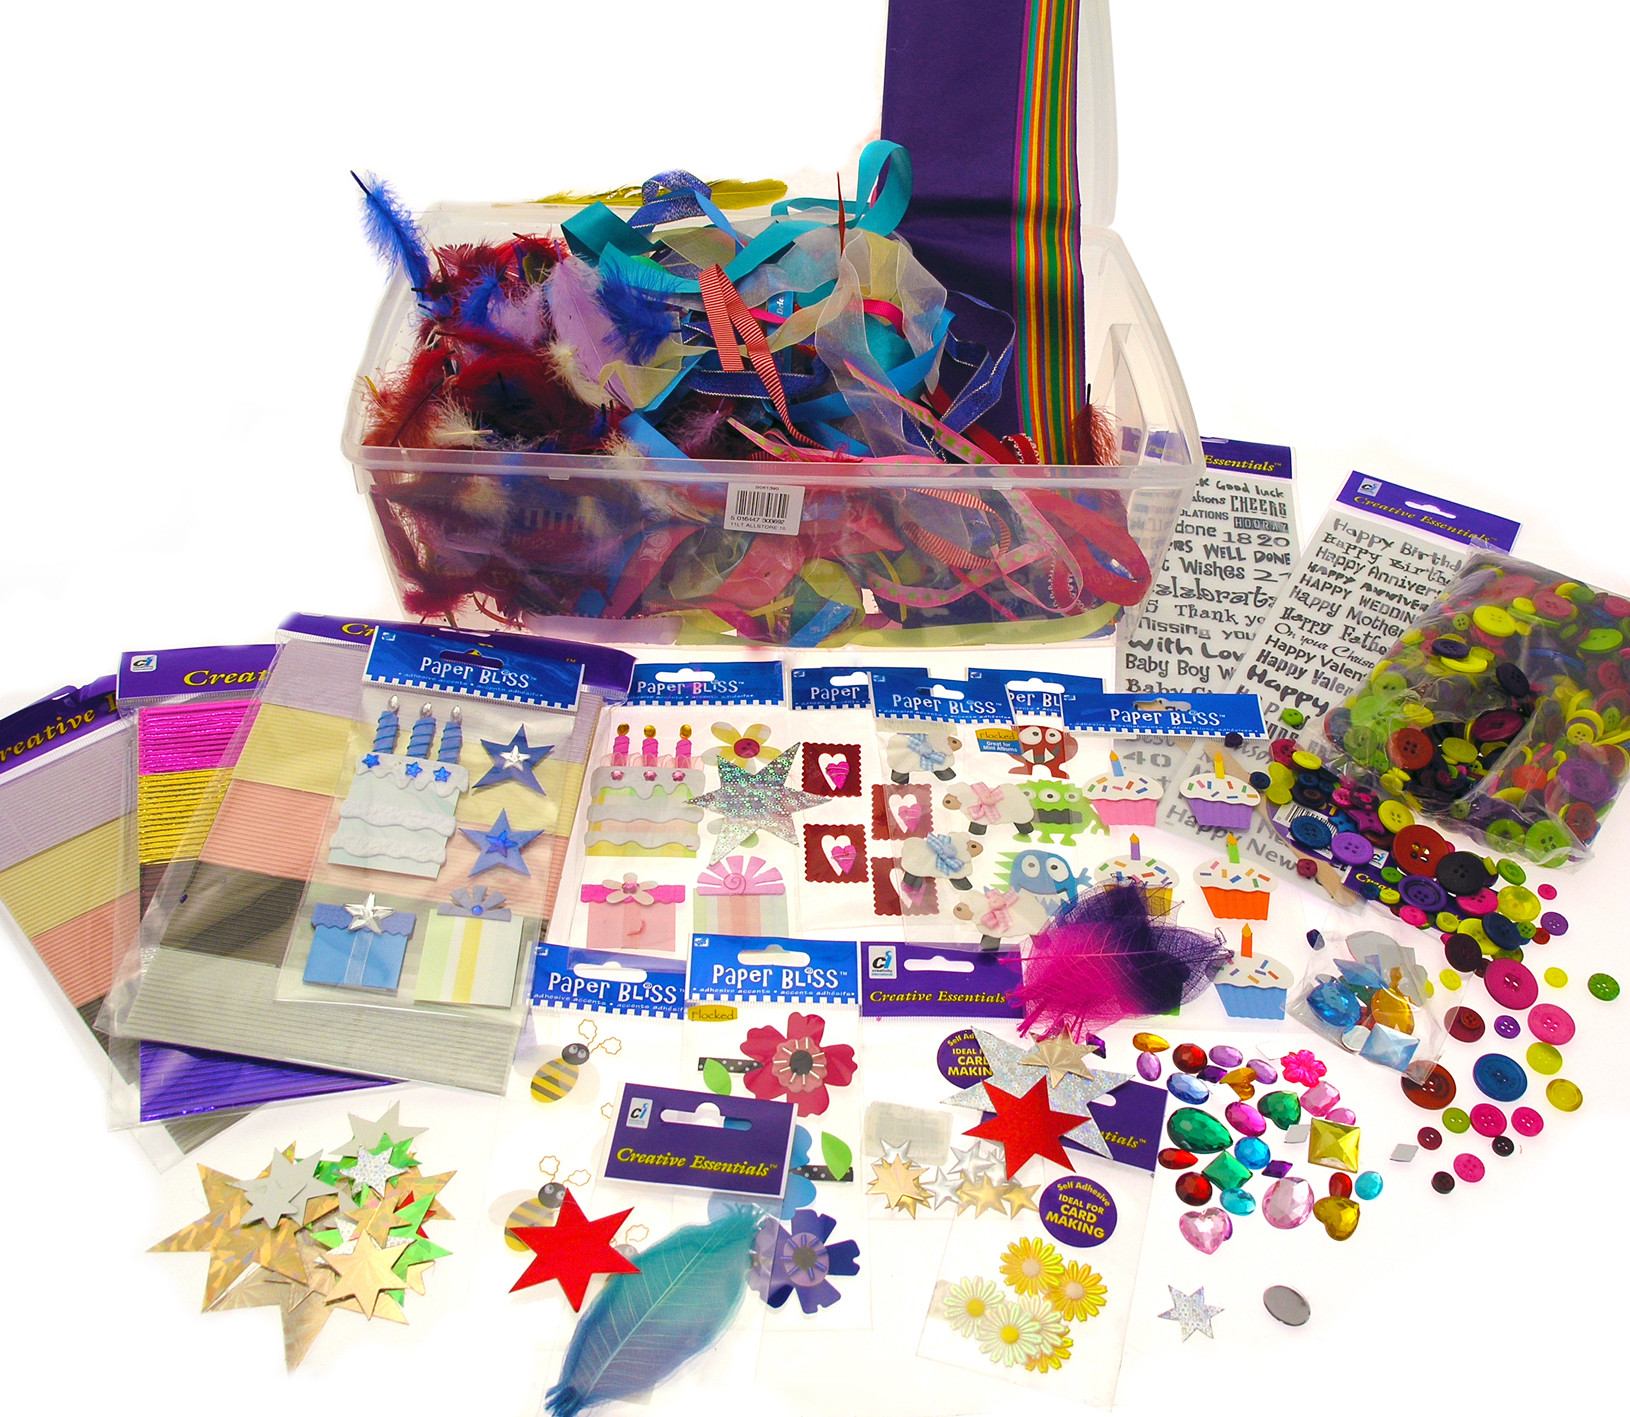 Craft Kits For Kids
 Bumper craft kits ideal for a crafty kids party